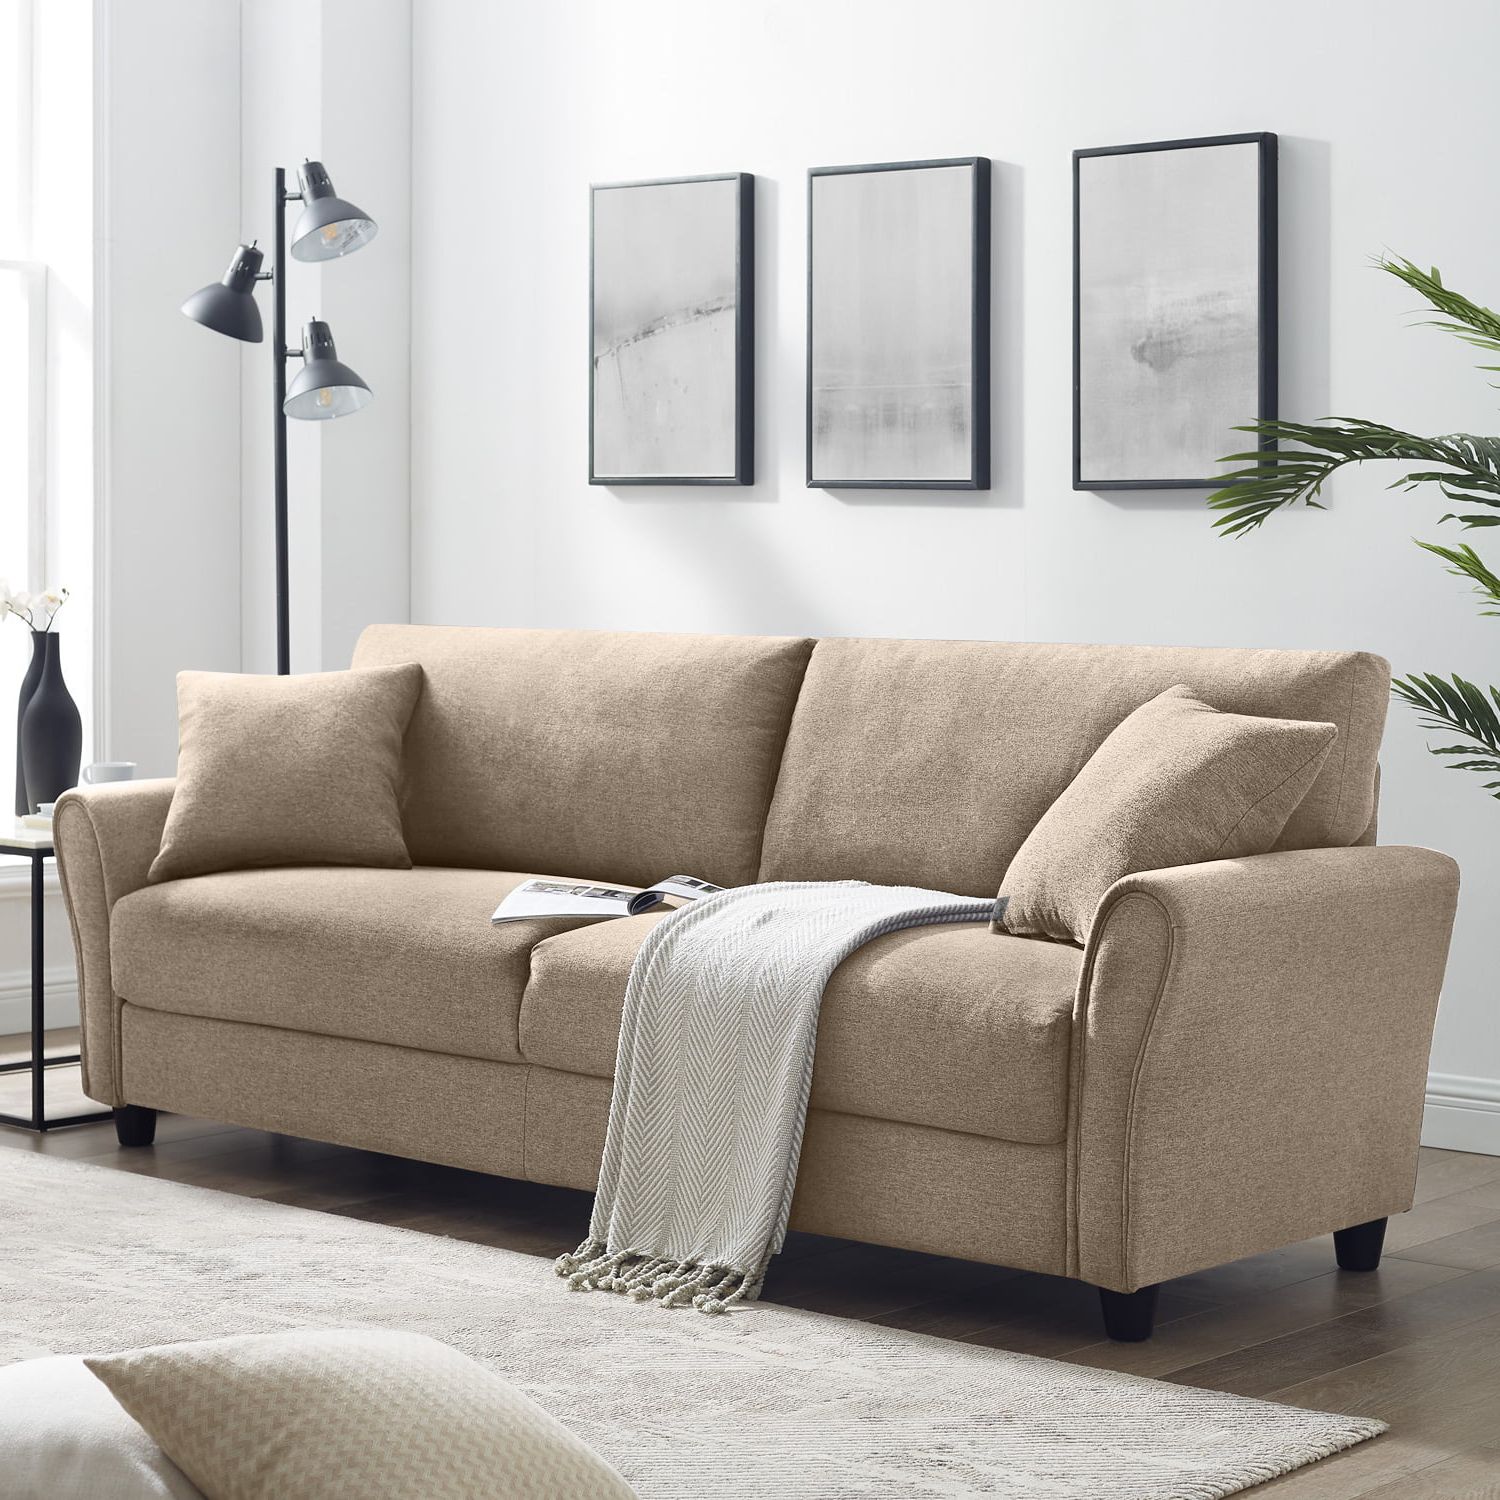 Most Recent Sofas For Living Rooms With Upholstered 85 Inch Sofa Modern Linen Living Room Couch – Walmart (View 13 of 15)